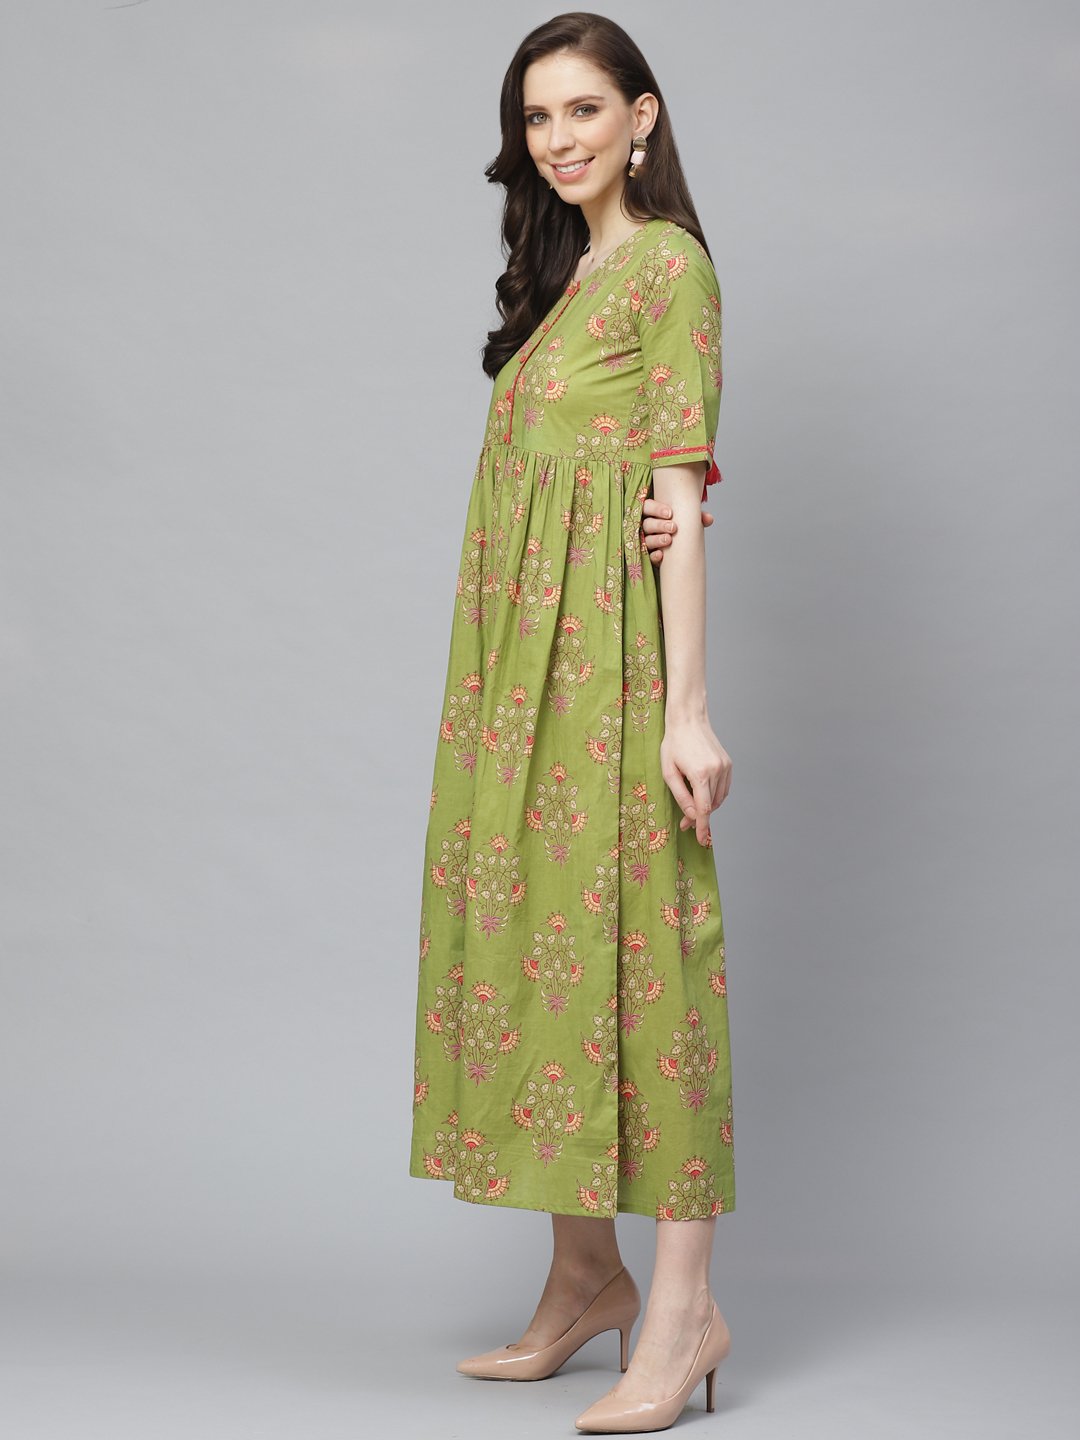 Women's Green Floral Printed Round Neck Cotton A-Line Dress - Nayo Clothing